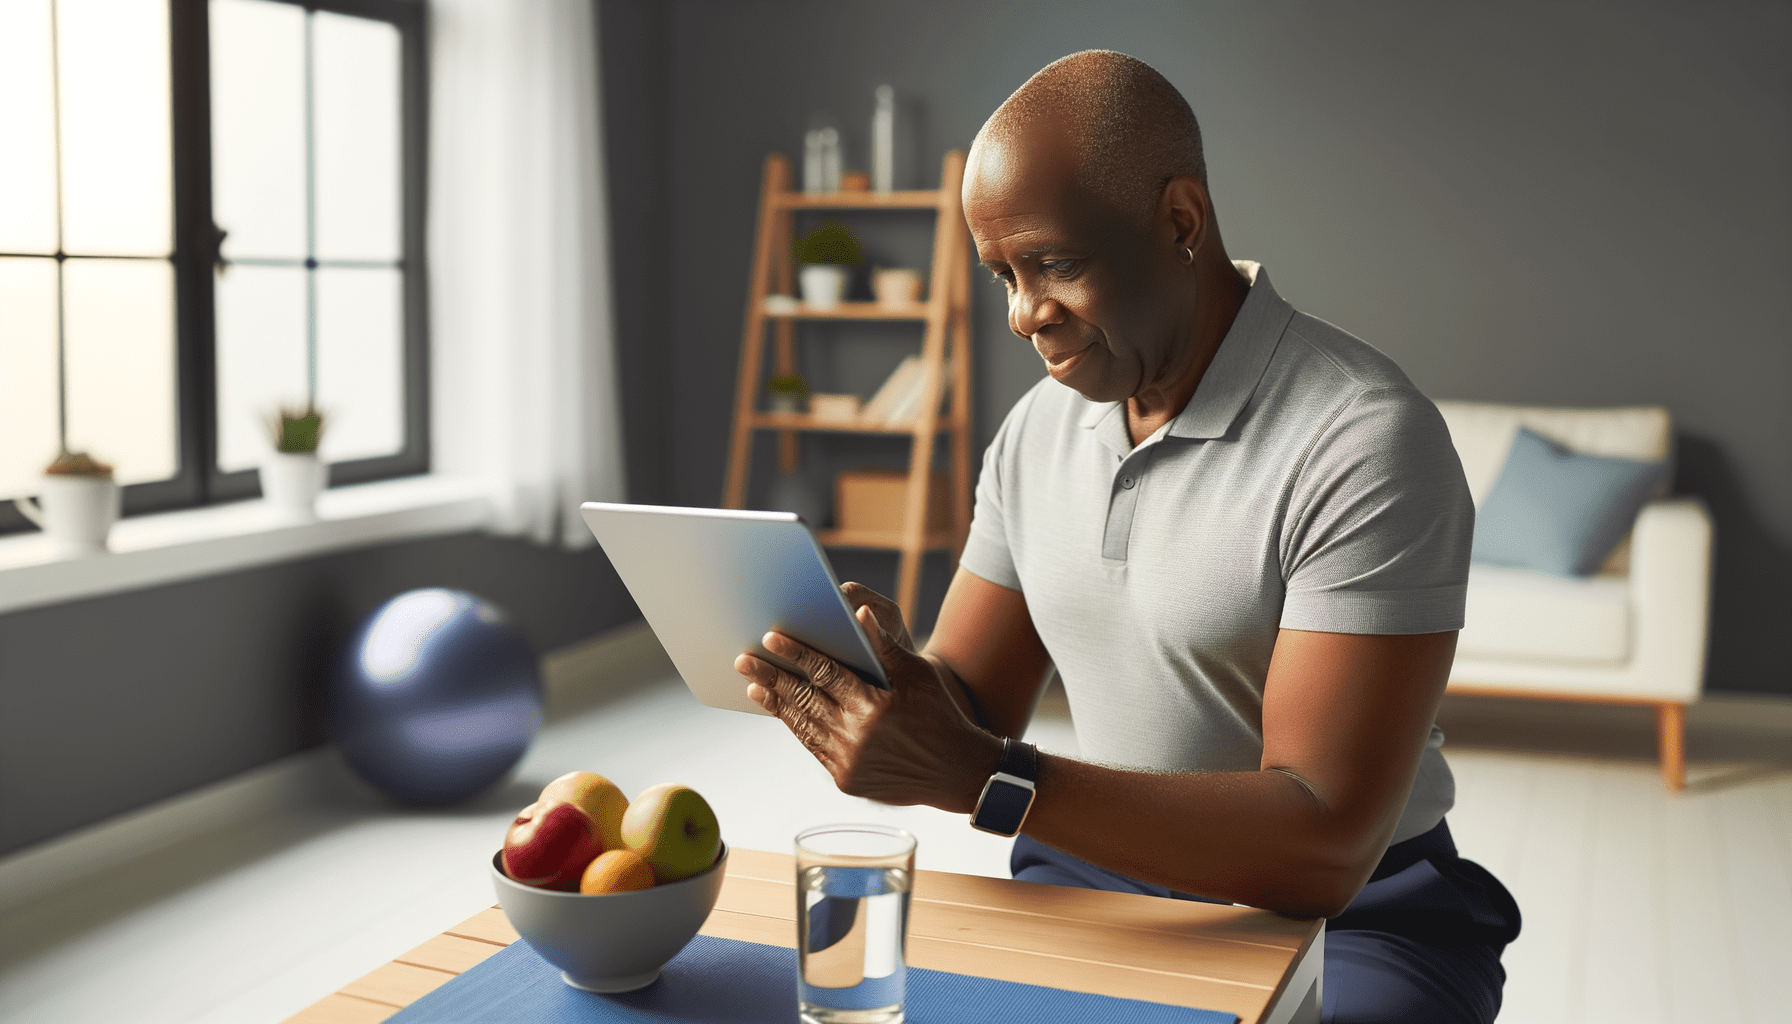 Digital Health Libraries: Essential Online Resources for Aging Adults